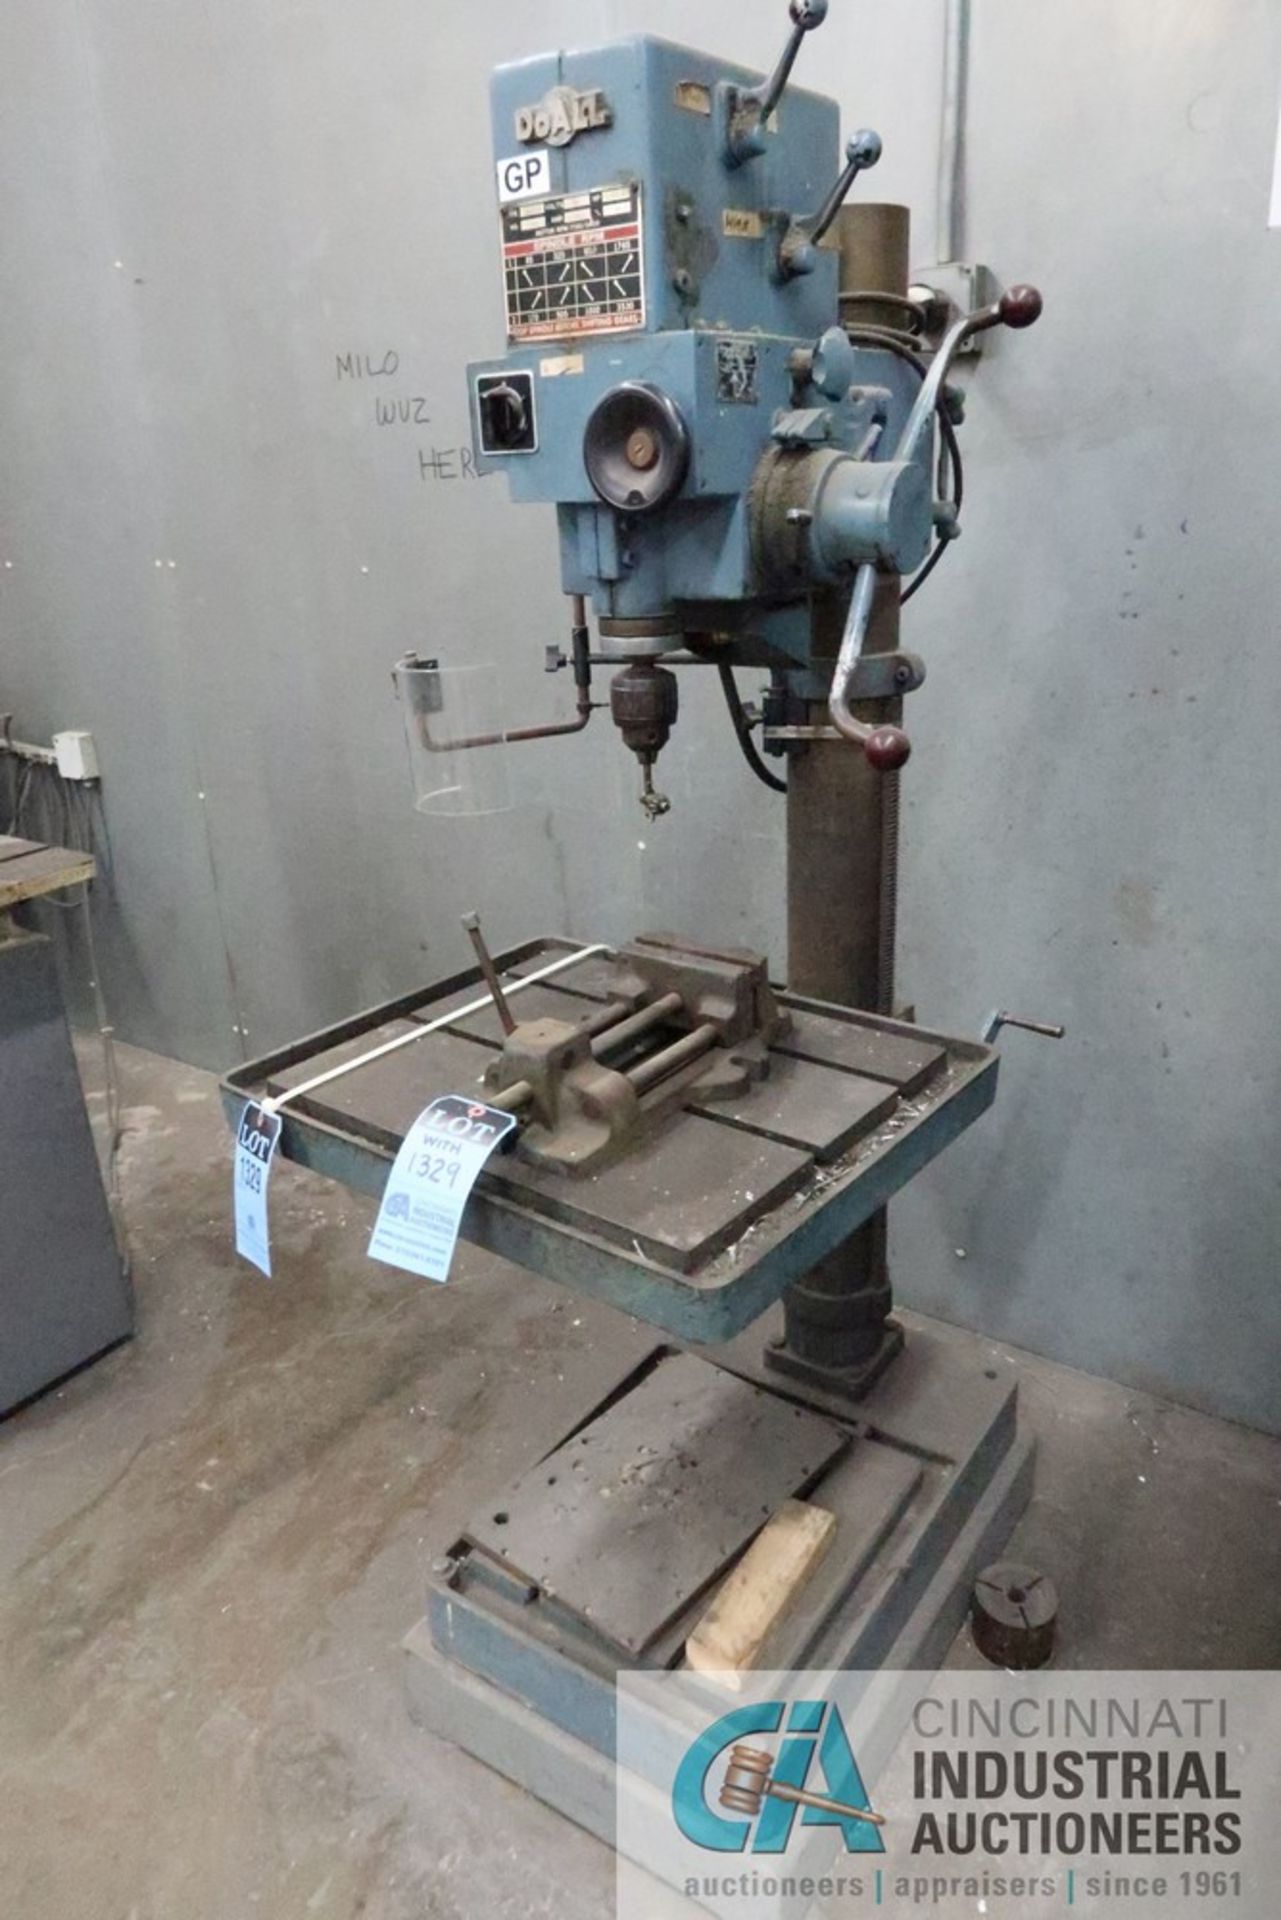 25" DOALL TYPE D-25150 HEAVY DUTY FLOOR DRILL; S/N 38362, 3-PHASE, 230 VOLTS, 85-3,530 SPINDLE - Image 4 of 4